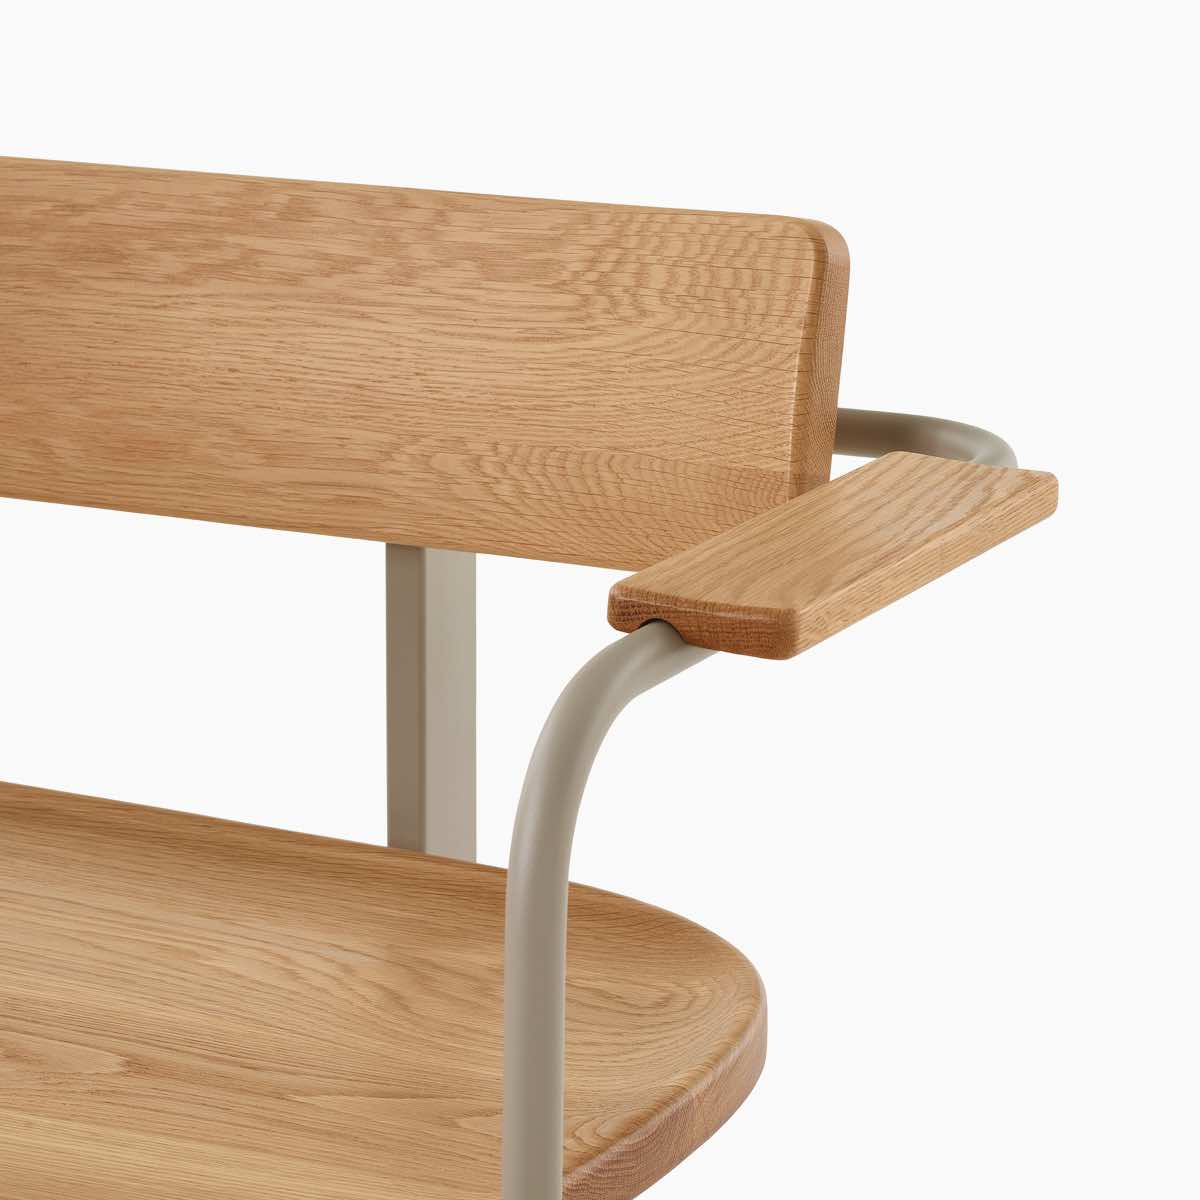 A close up of a Betwixt Bench with oak seat, backrest, and arms, with a grey frame.